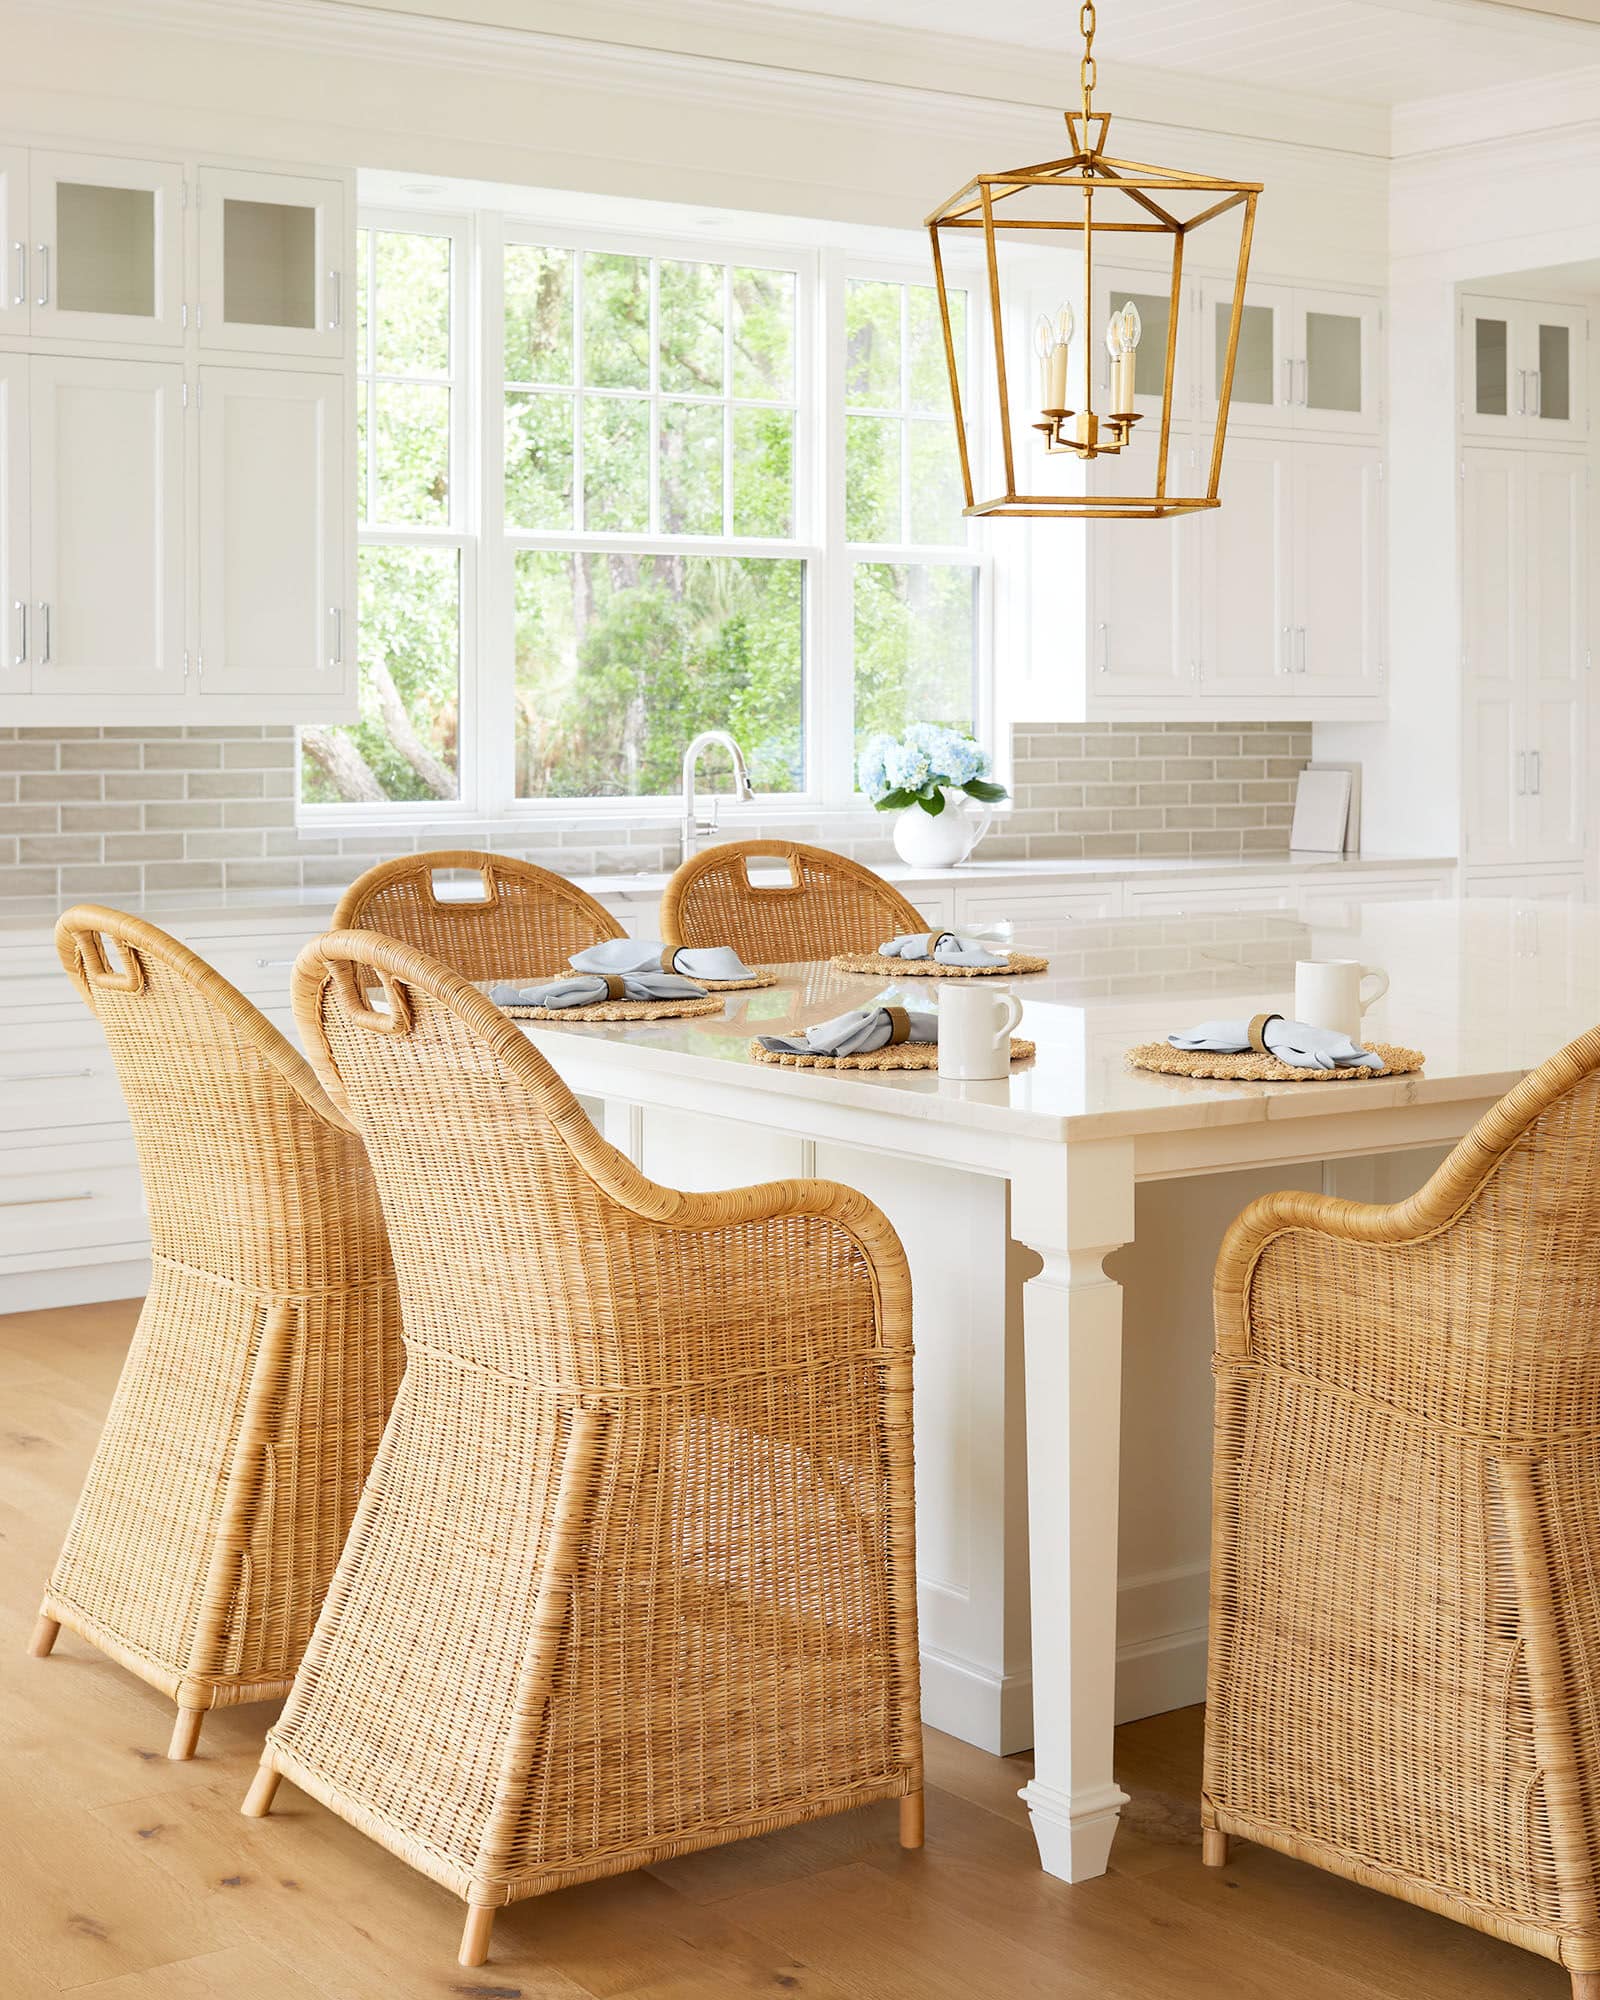 Set the Island with Handwoven Placemats